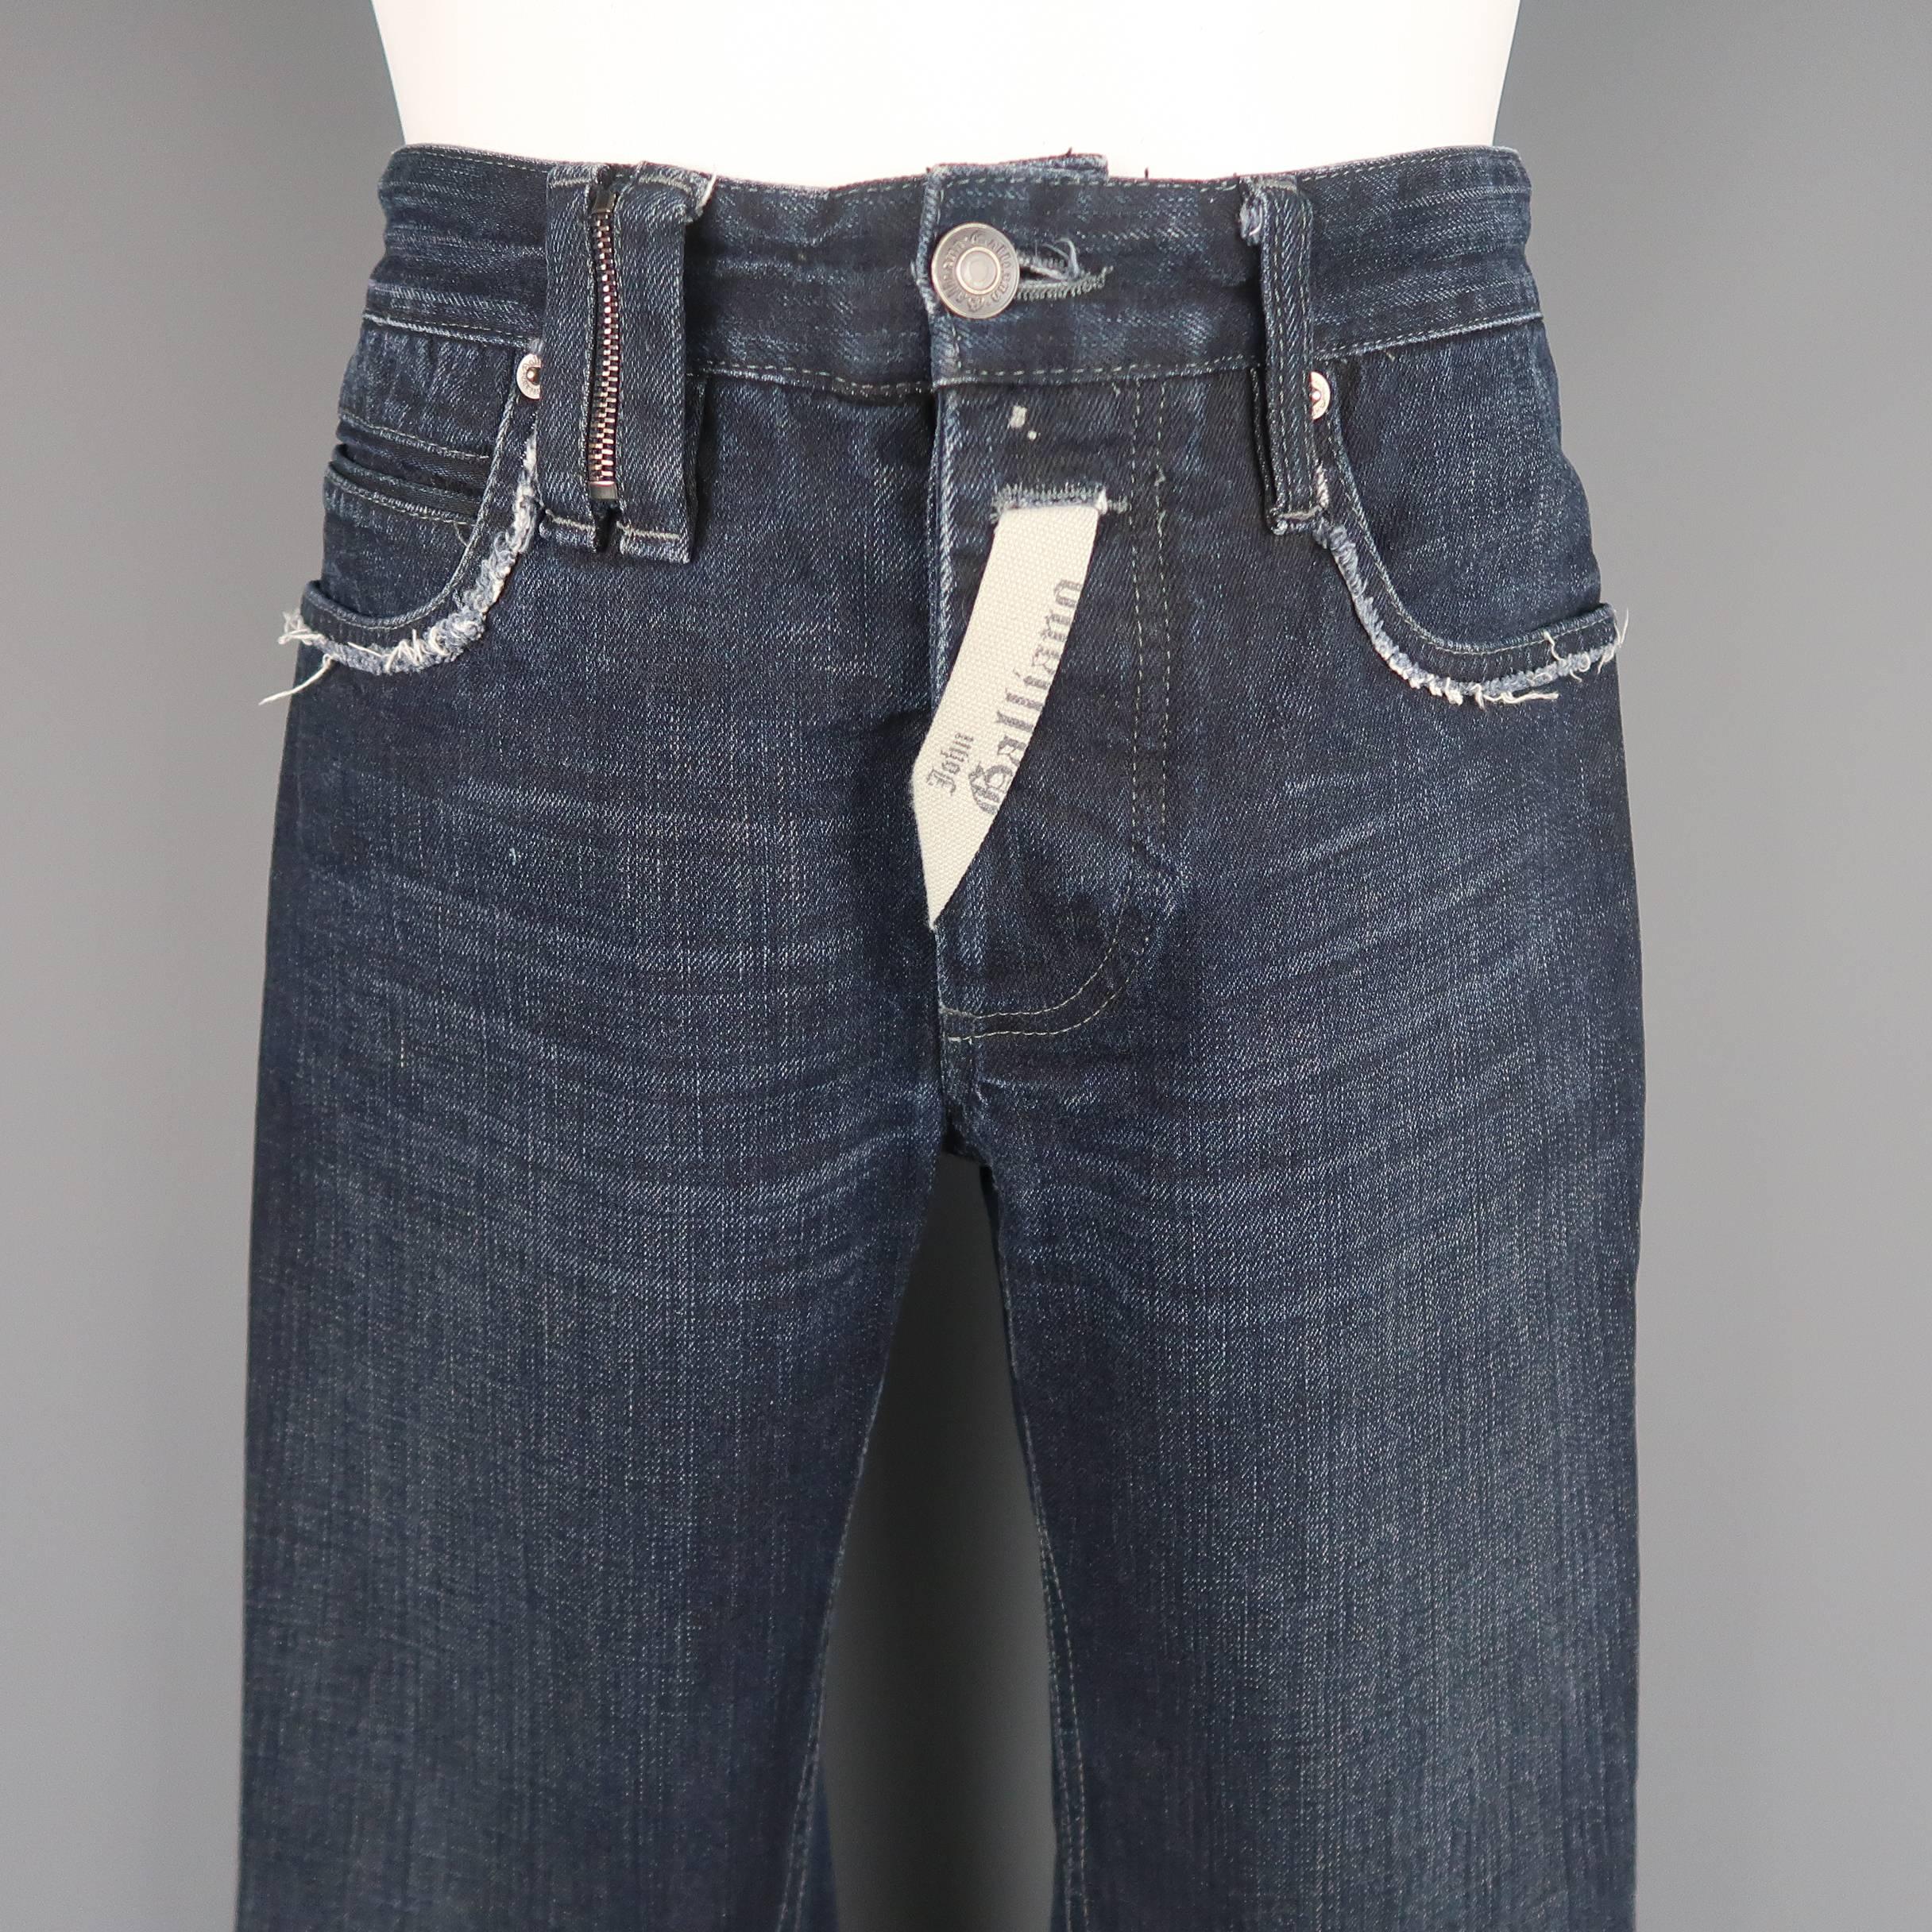 JOHN GALLIANO jeans come in navy washed denim with distressed trim, zipper belt loop, logo ribbon fly embellishment, and metal hoop detailed back. Made in Italy.
 
Good Pre-Owned Condition.
Marked: IT 46
 
Measurements:
 
Waist: 30 n.
Rise: 9.5